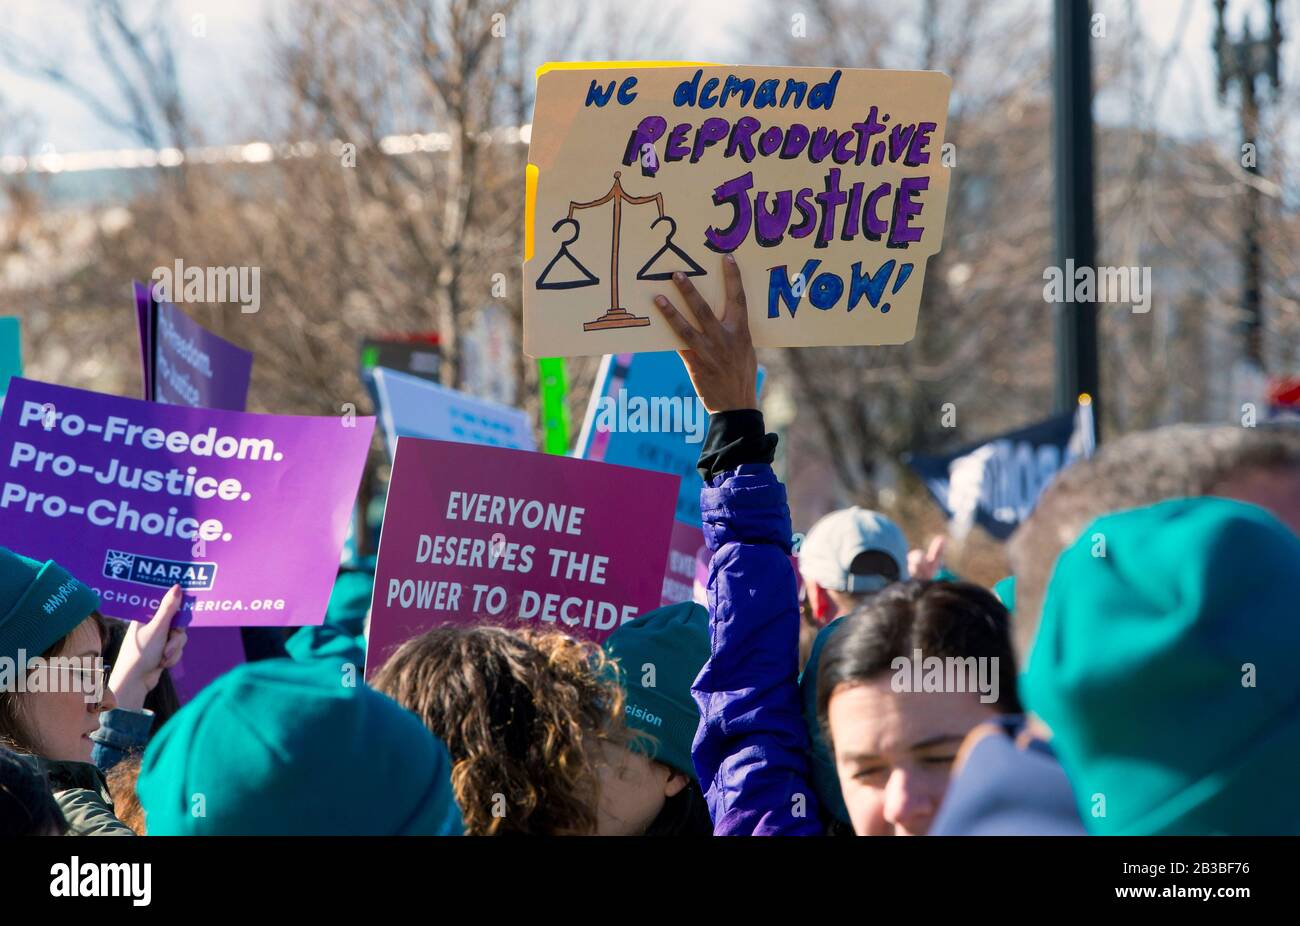 March 04, 2020 - Washington, District of Columbia, U.S. -  People rally in front of the United States Supreme Court as arguments are heard in Russo v. June Medical Services LLC. The case was brought by the Center for Reproductive Rights challenging a Louisiana law designed to close women's healthcare clinics and restrict access to abortion services.(Credit Image: © Brian Cahn/ZUMA Wire) Stock Photo